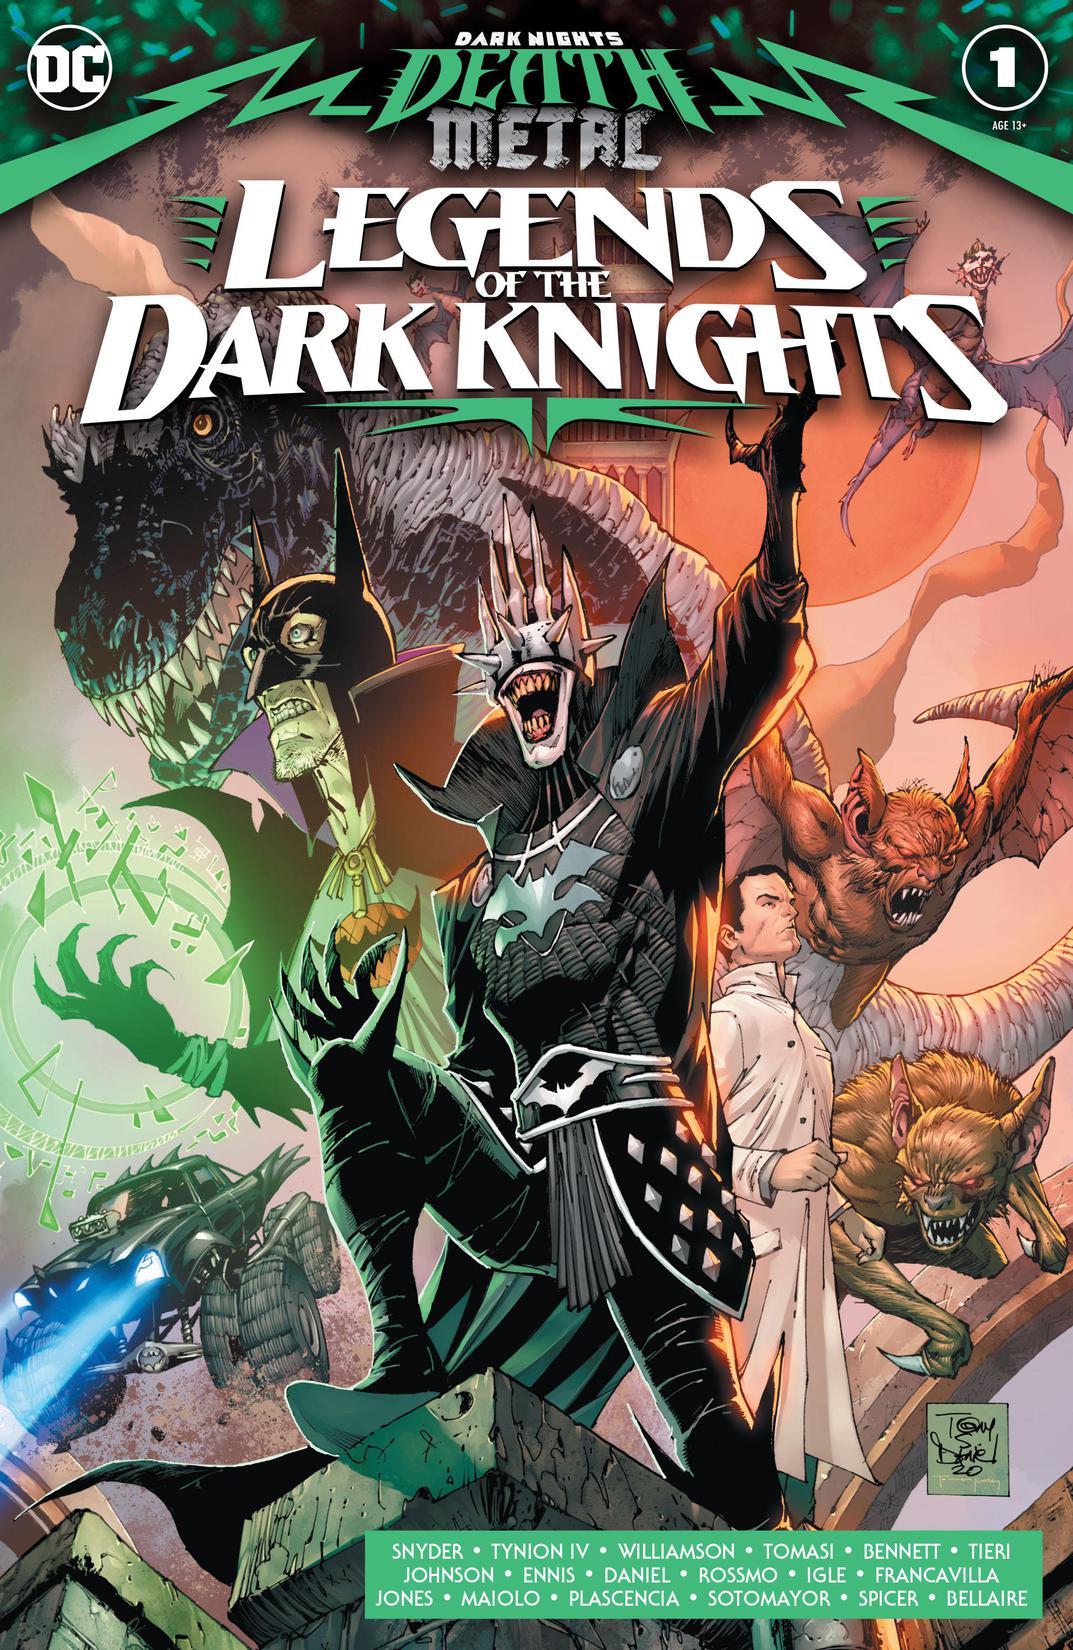 Dark Nights: Death Metal Legends of the Dark Knights #1 preview images